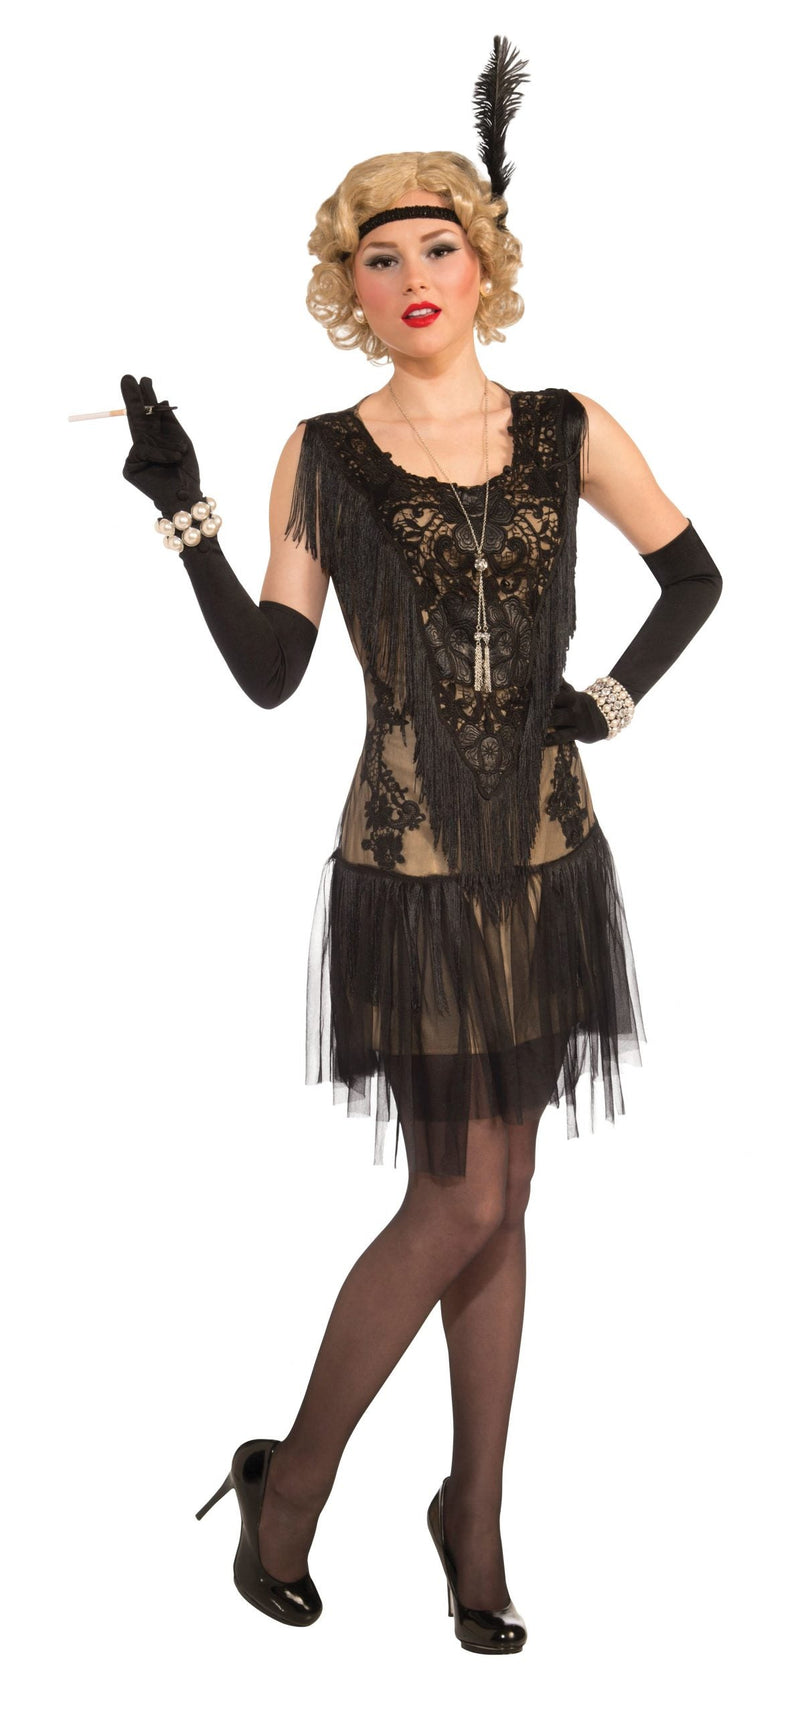 Womens Lacey Lindy Deluxe Flapper Dress Adult Costume Female Halloween_1 AC569